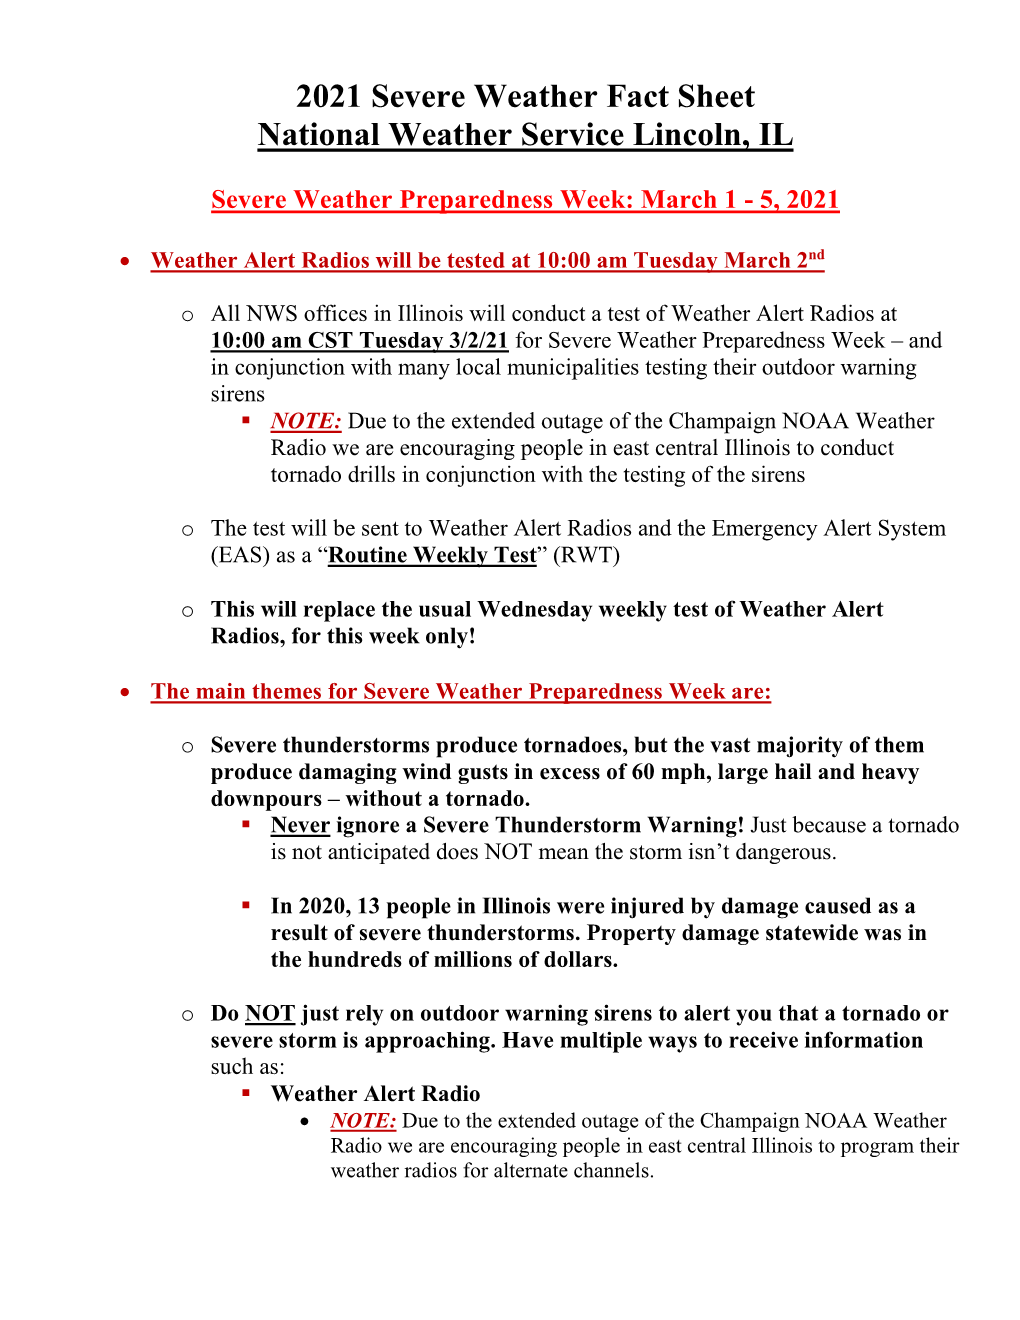 2021 Severe Weather Fact Sheet National Weather Service Lincoln, IL